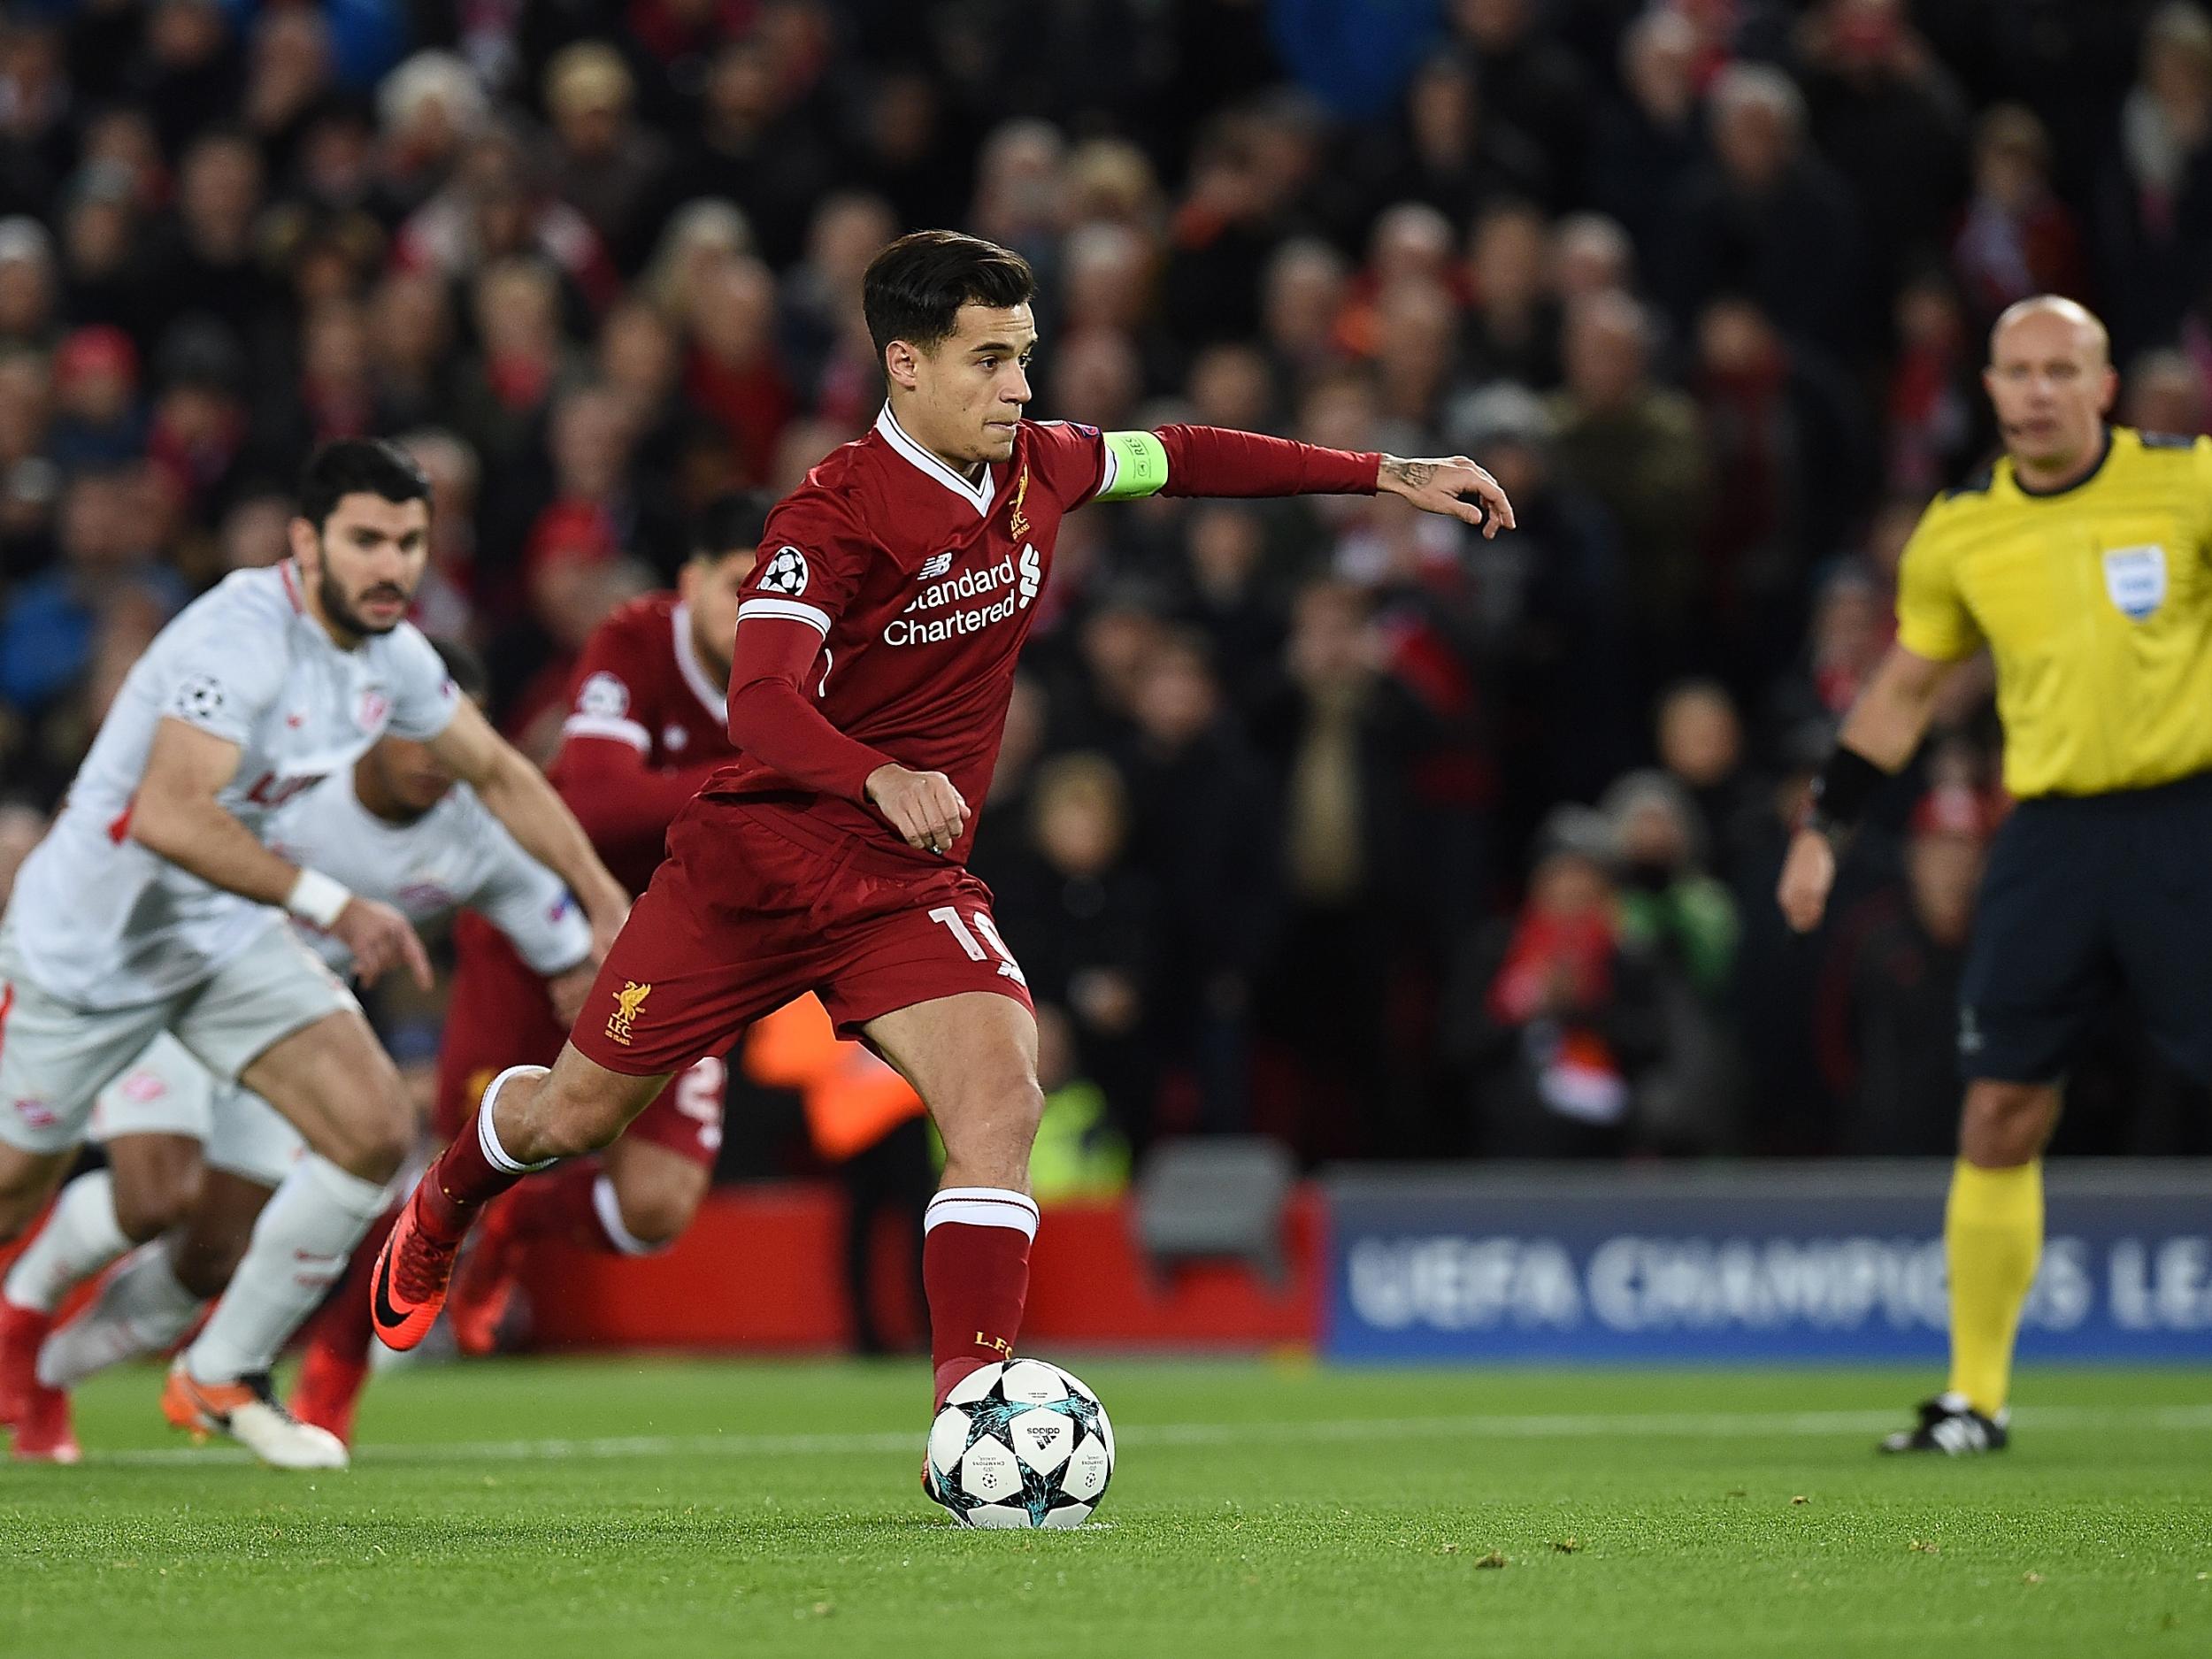 Coutinho marked his day as captain with three goals